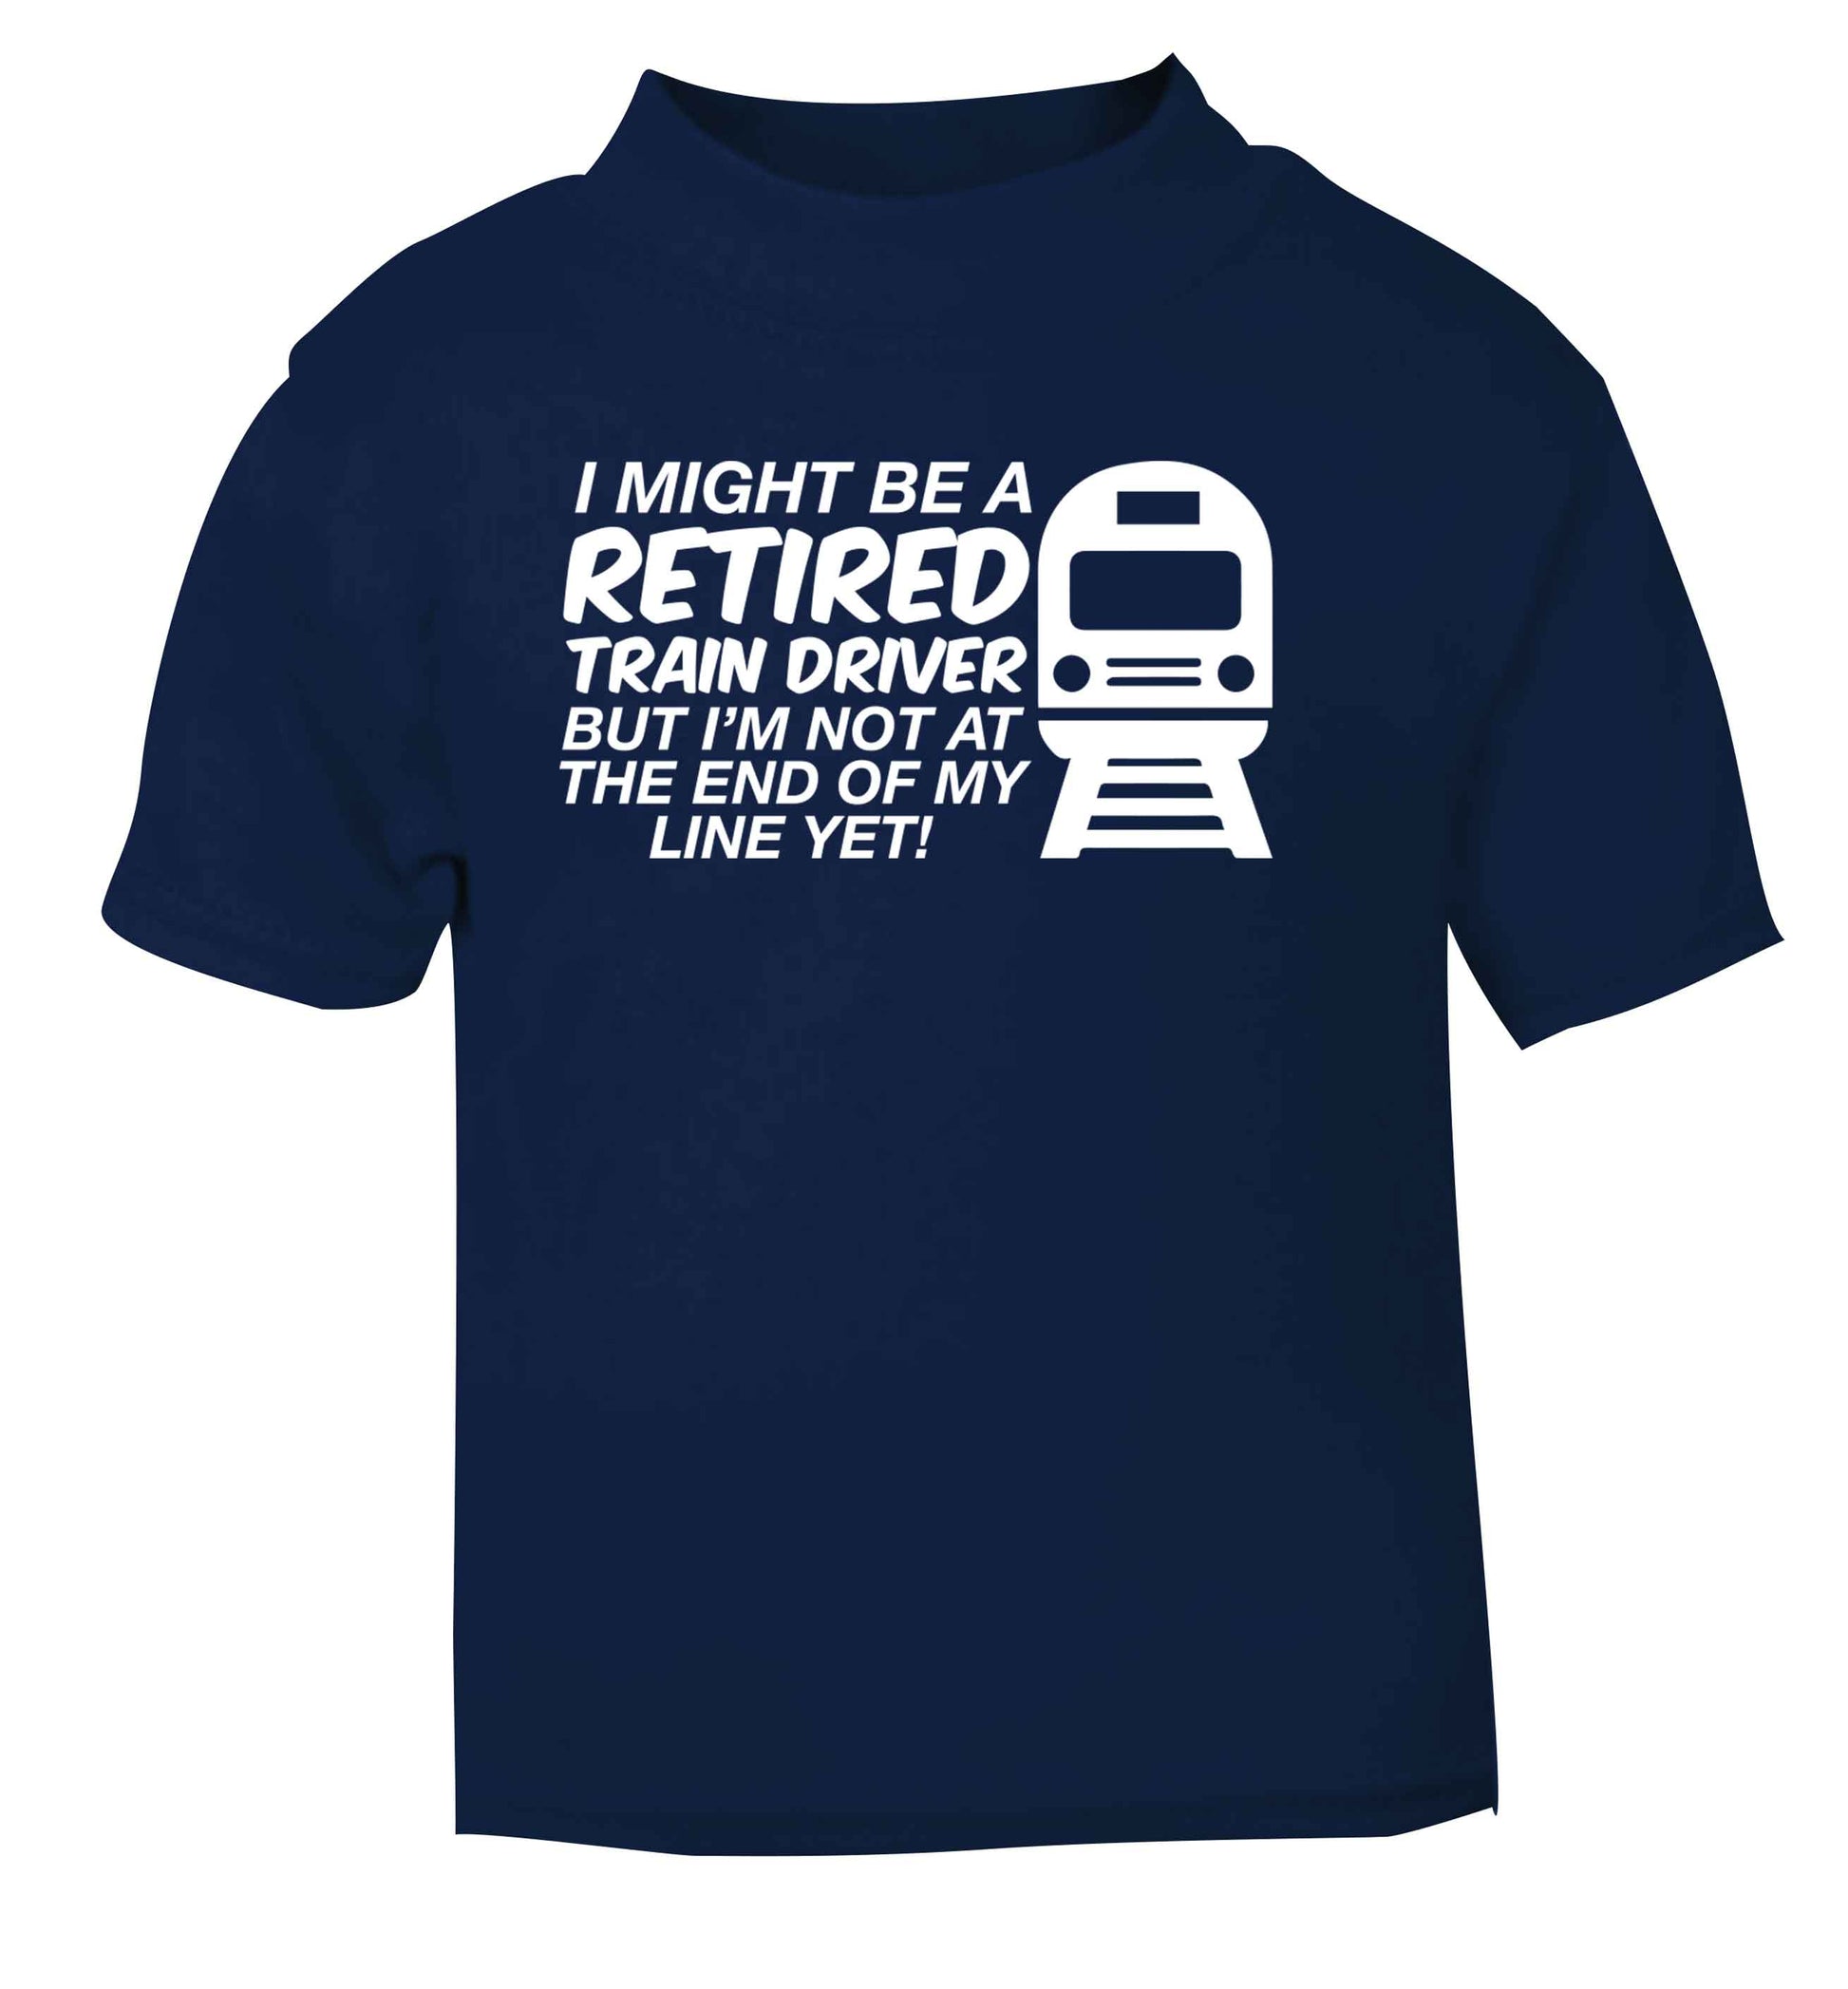 Retired train driver but I'm not at the end of my line yet navy Baby Toddler Tshirt 2 Years